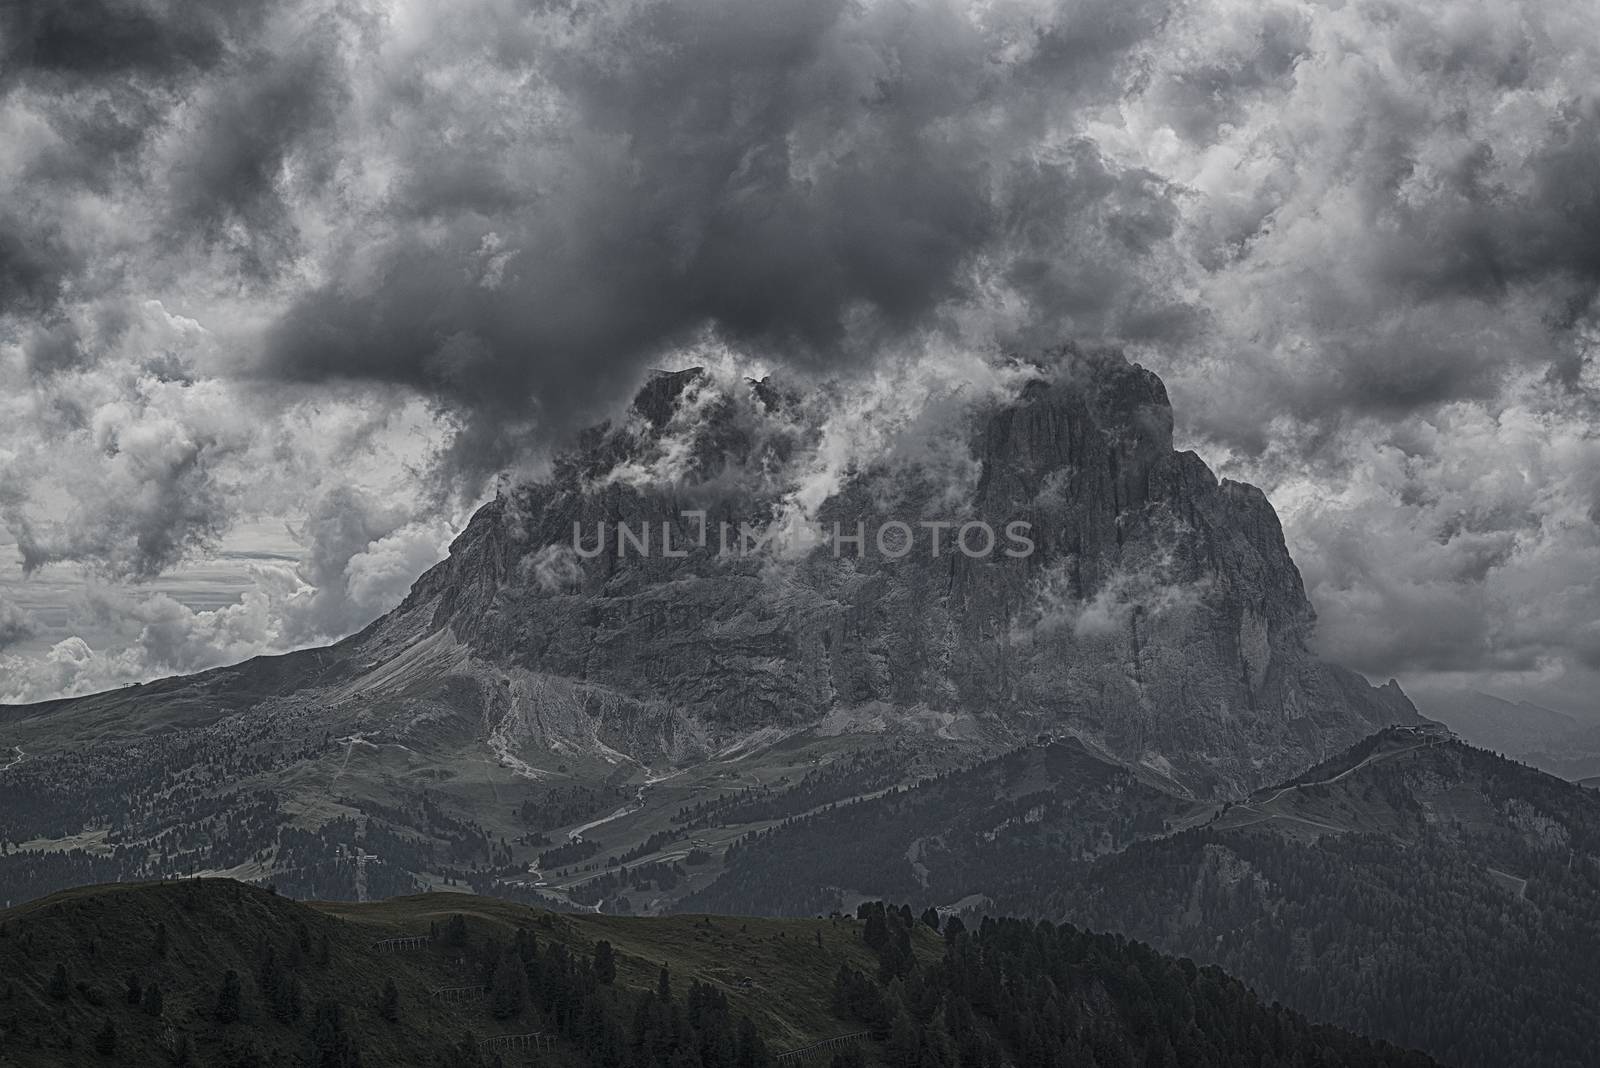 The Top of Langkofel in the clouds seen from Dantercepies, summer afternoon - Val Gardena, Dolomites